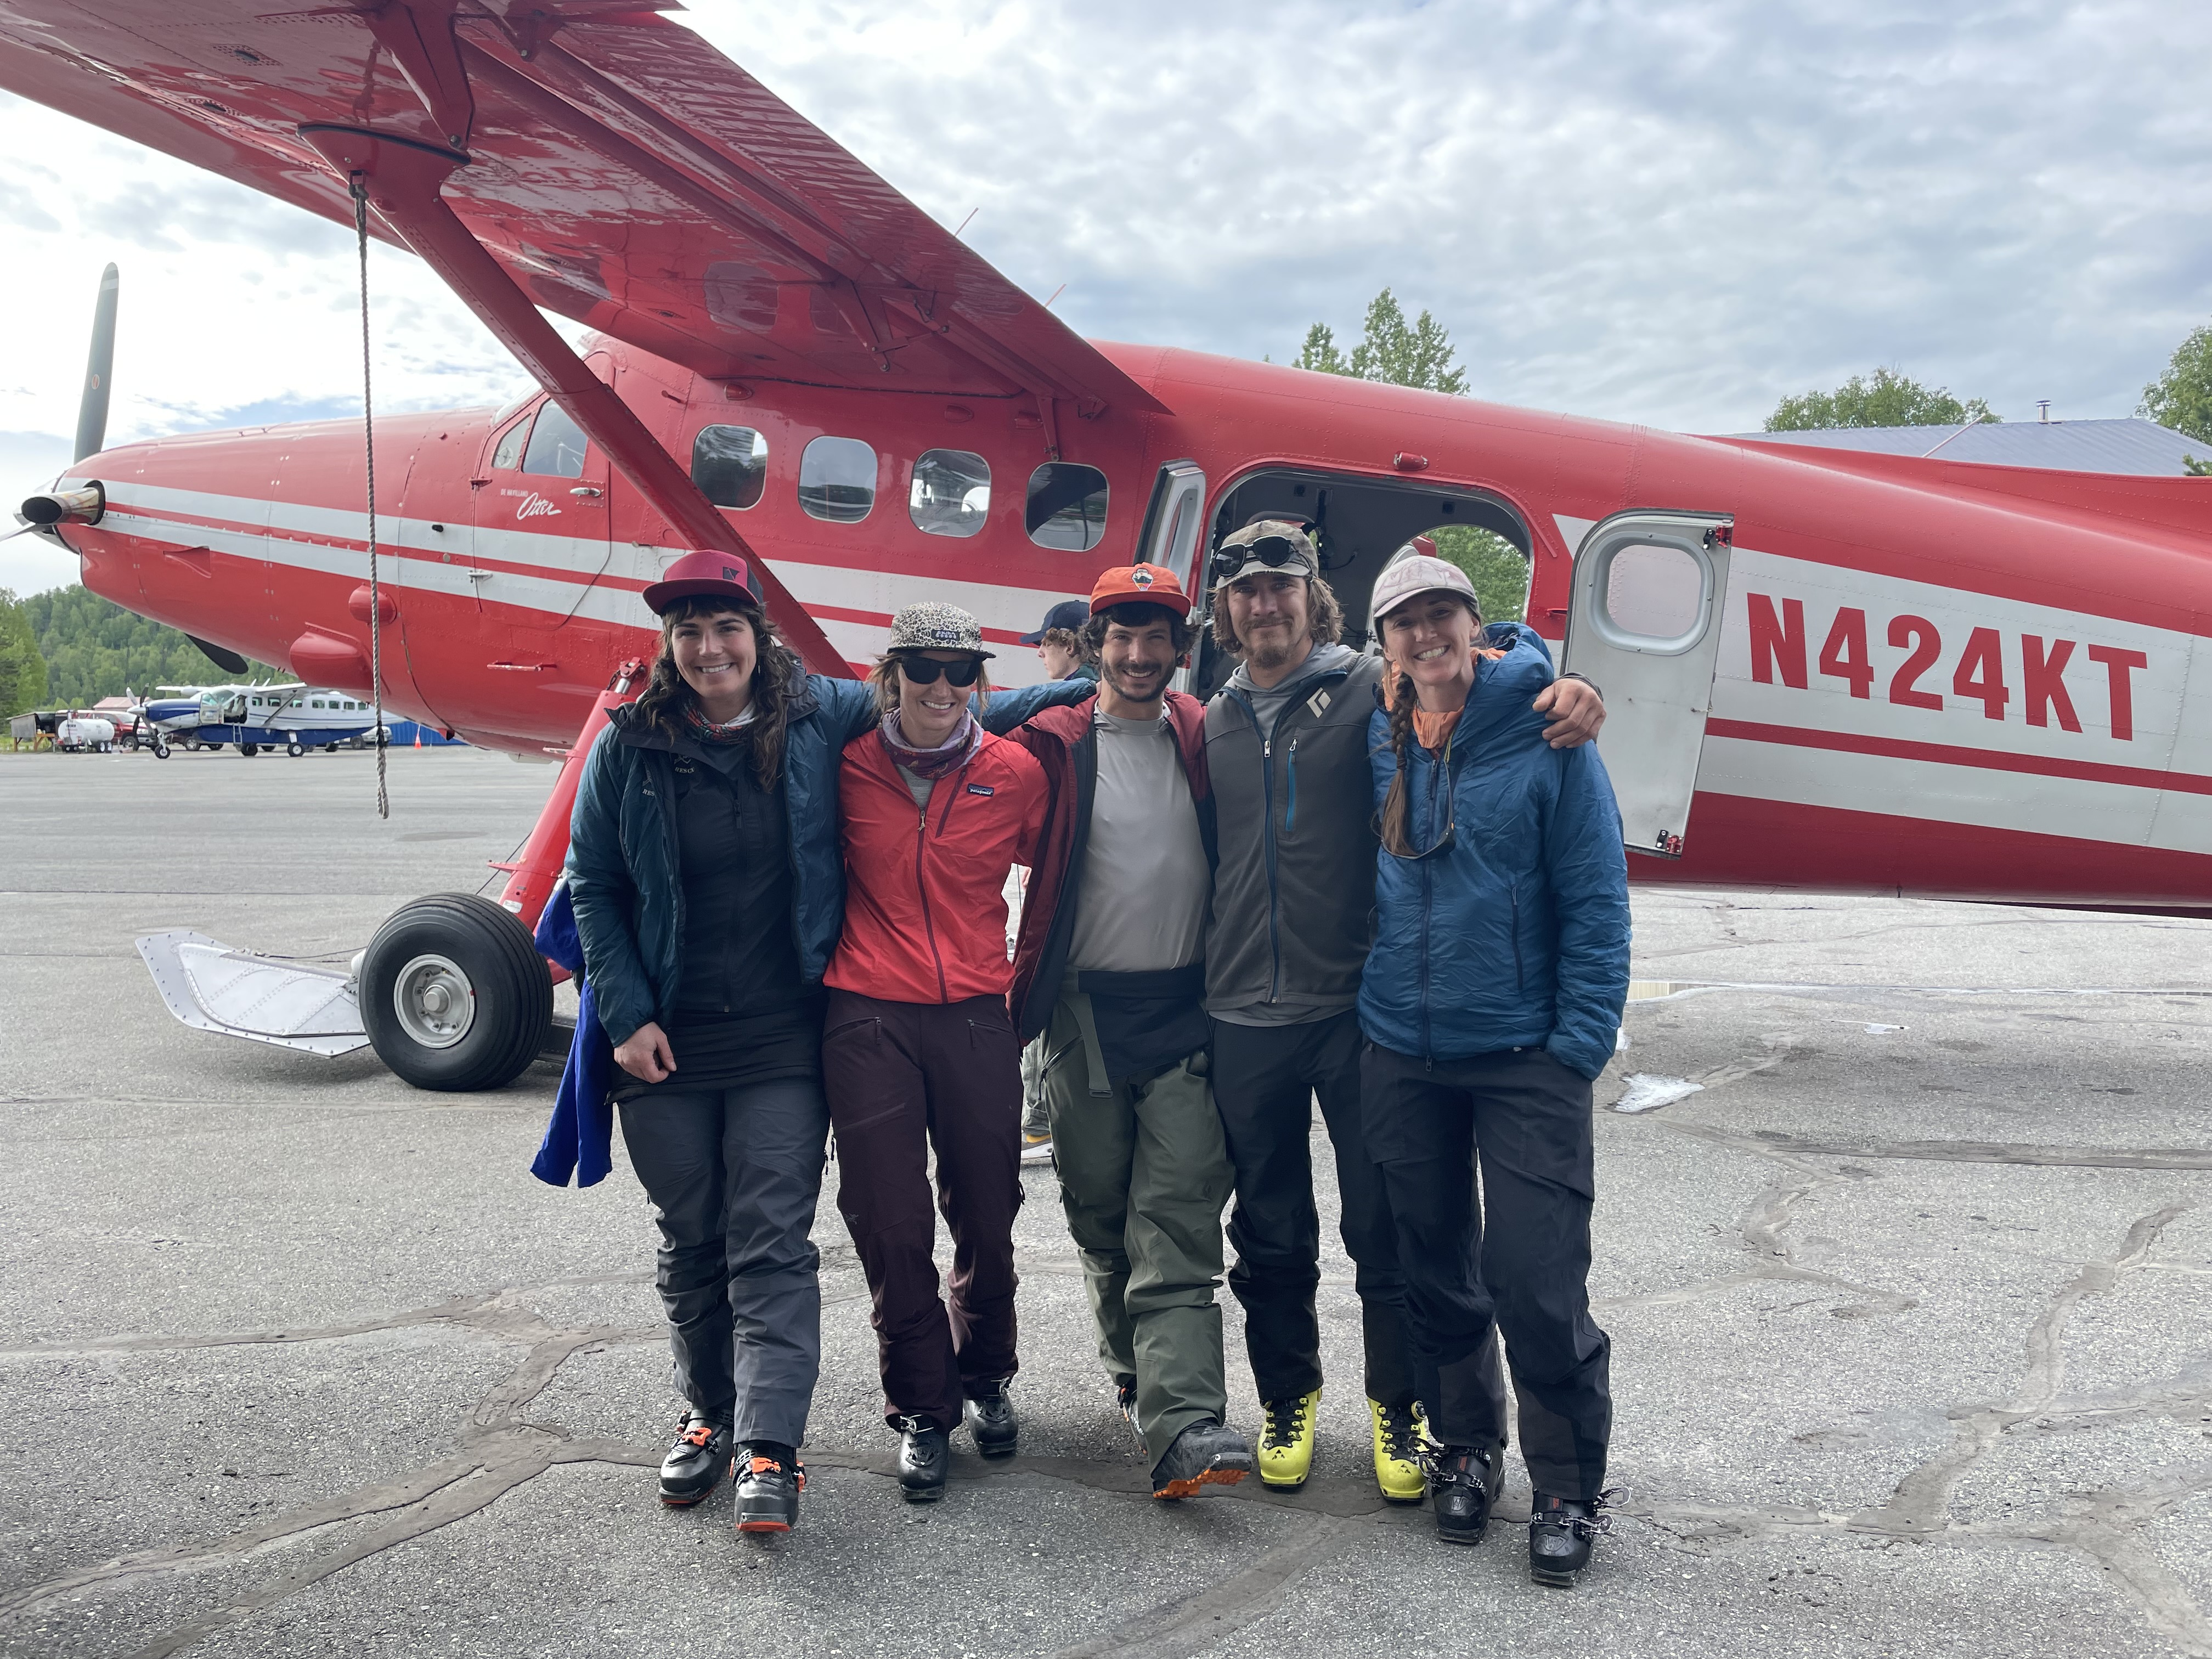 Five climbers link arms in front of a small red aircraft.